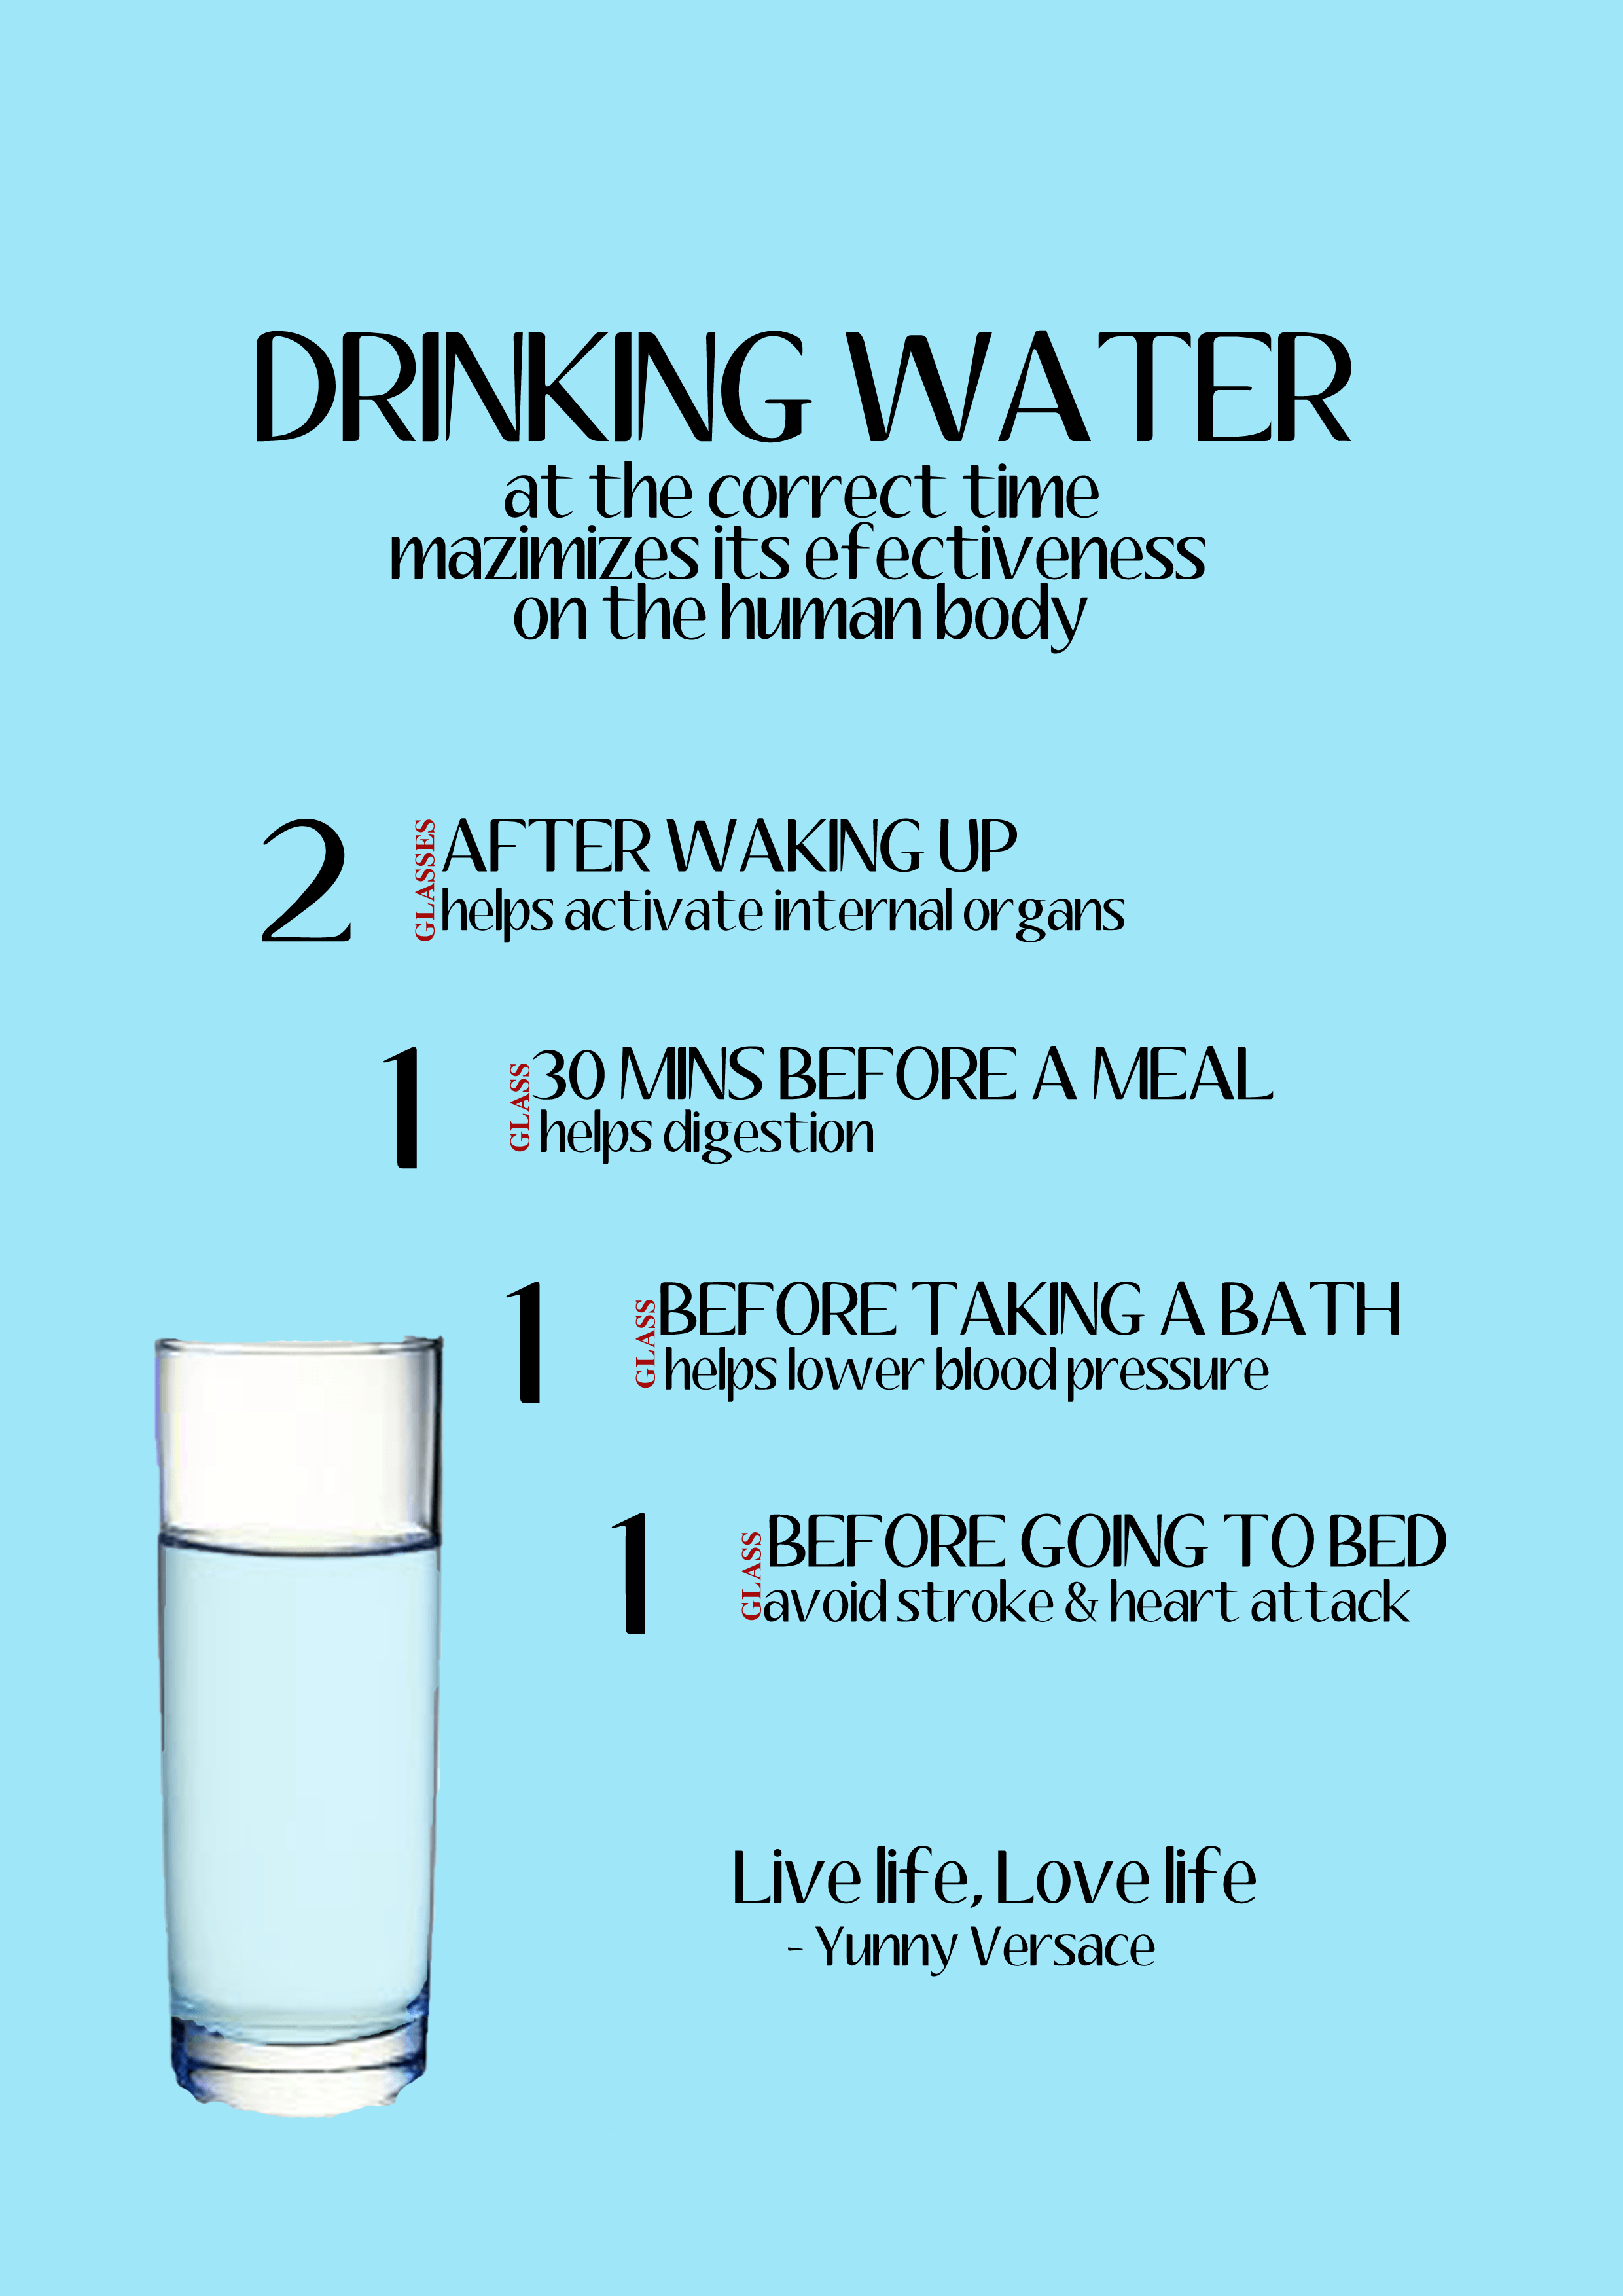 Timing Water Consumption for Optimal Benefits